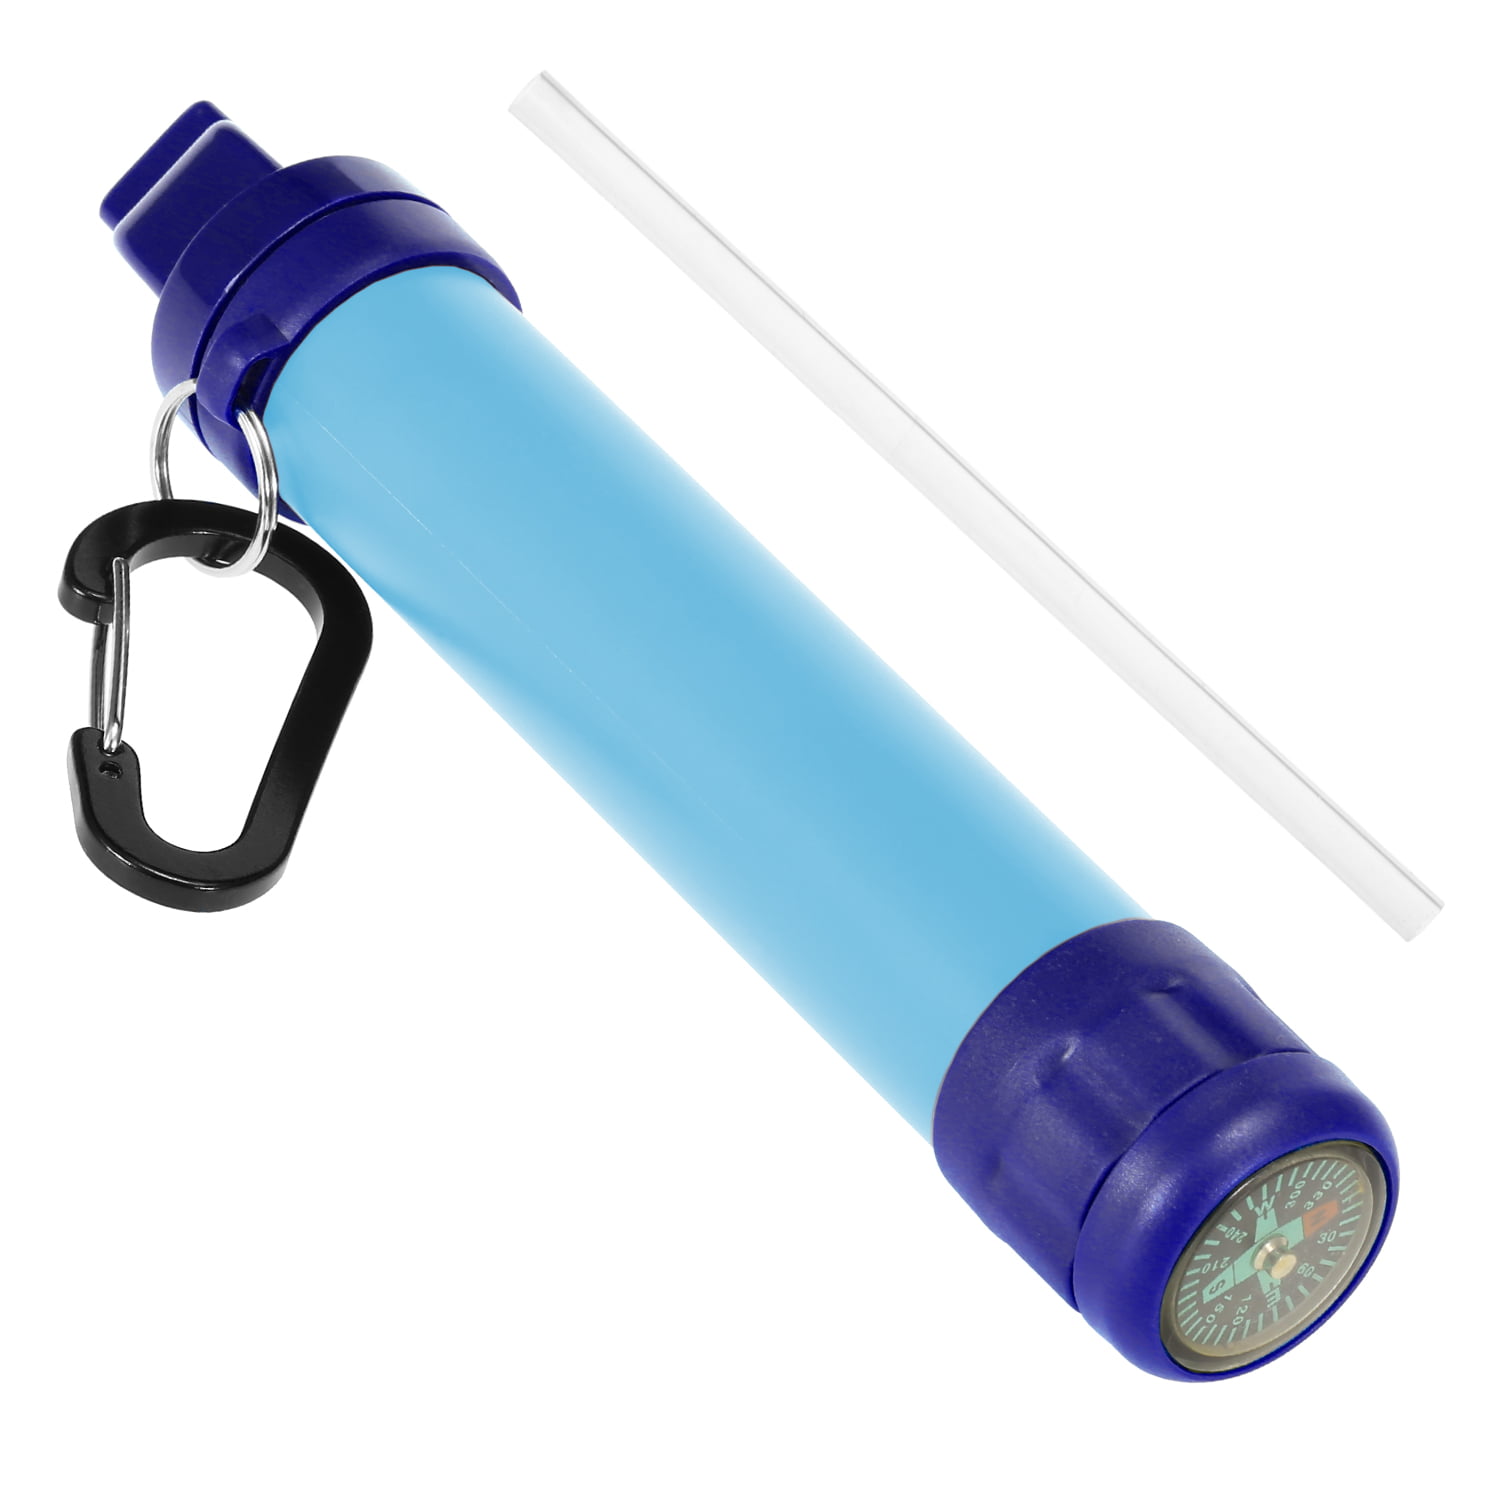 Produces Clean Pure Safe Water Emergency Survival Outdoor Tool Leezo Personal Water Filter Straw Purifier Straw Water Filter Purifier Filtration Straw with Whistle Compass,Mirror